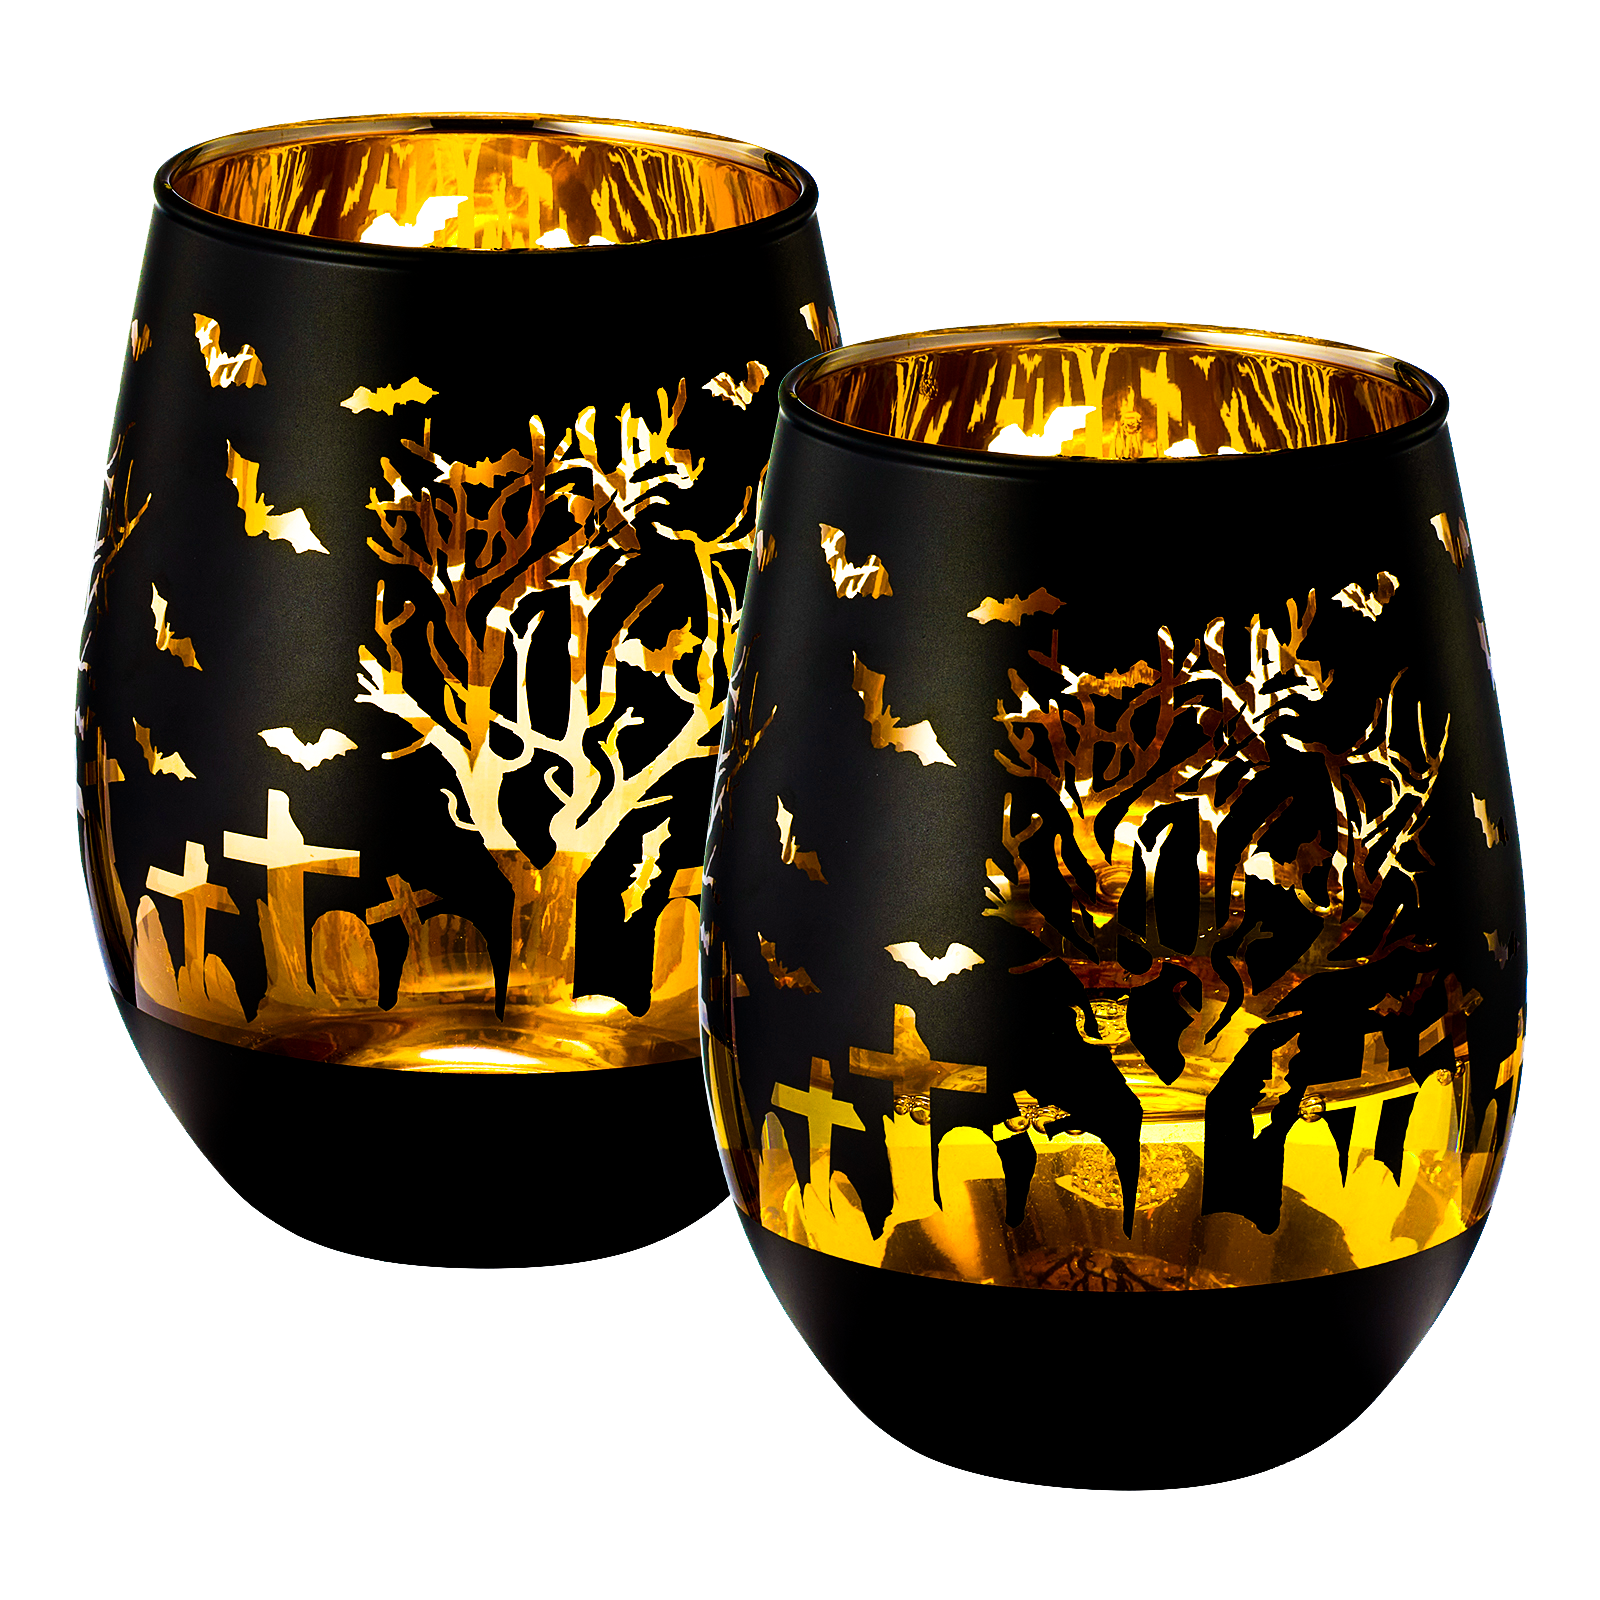 16 oz Whiskey or Wine Glasses with Frosted Design (2 Pack)